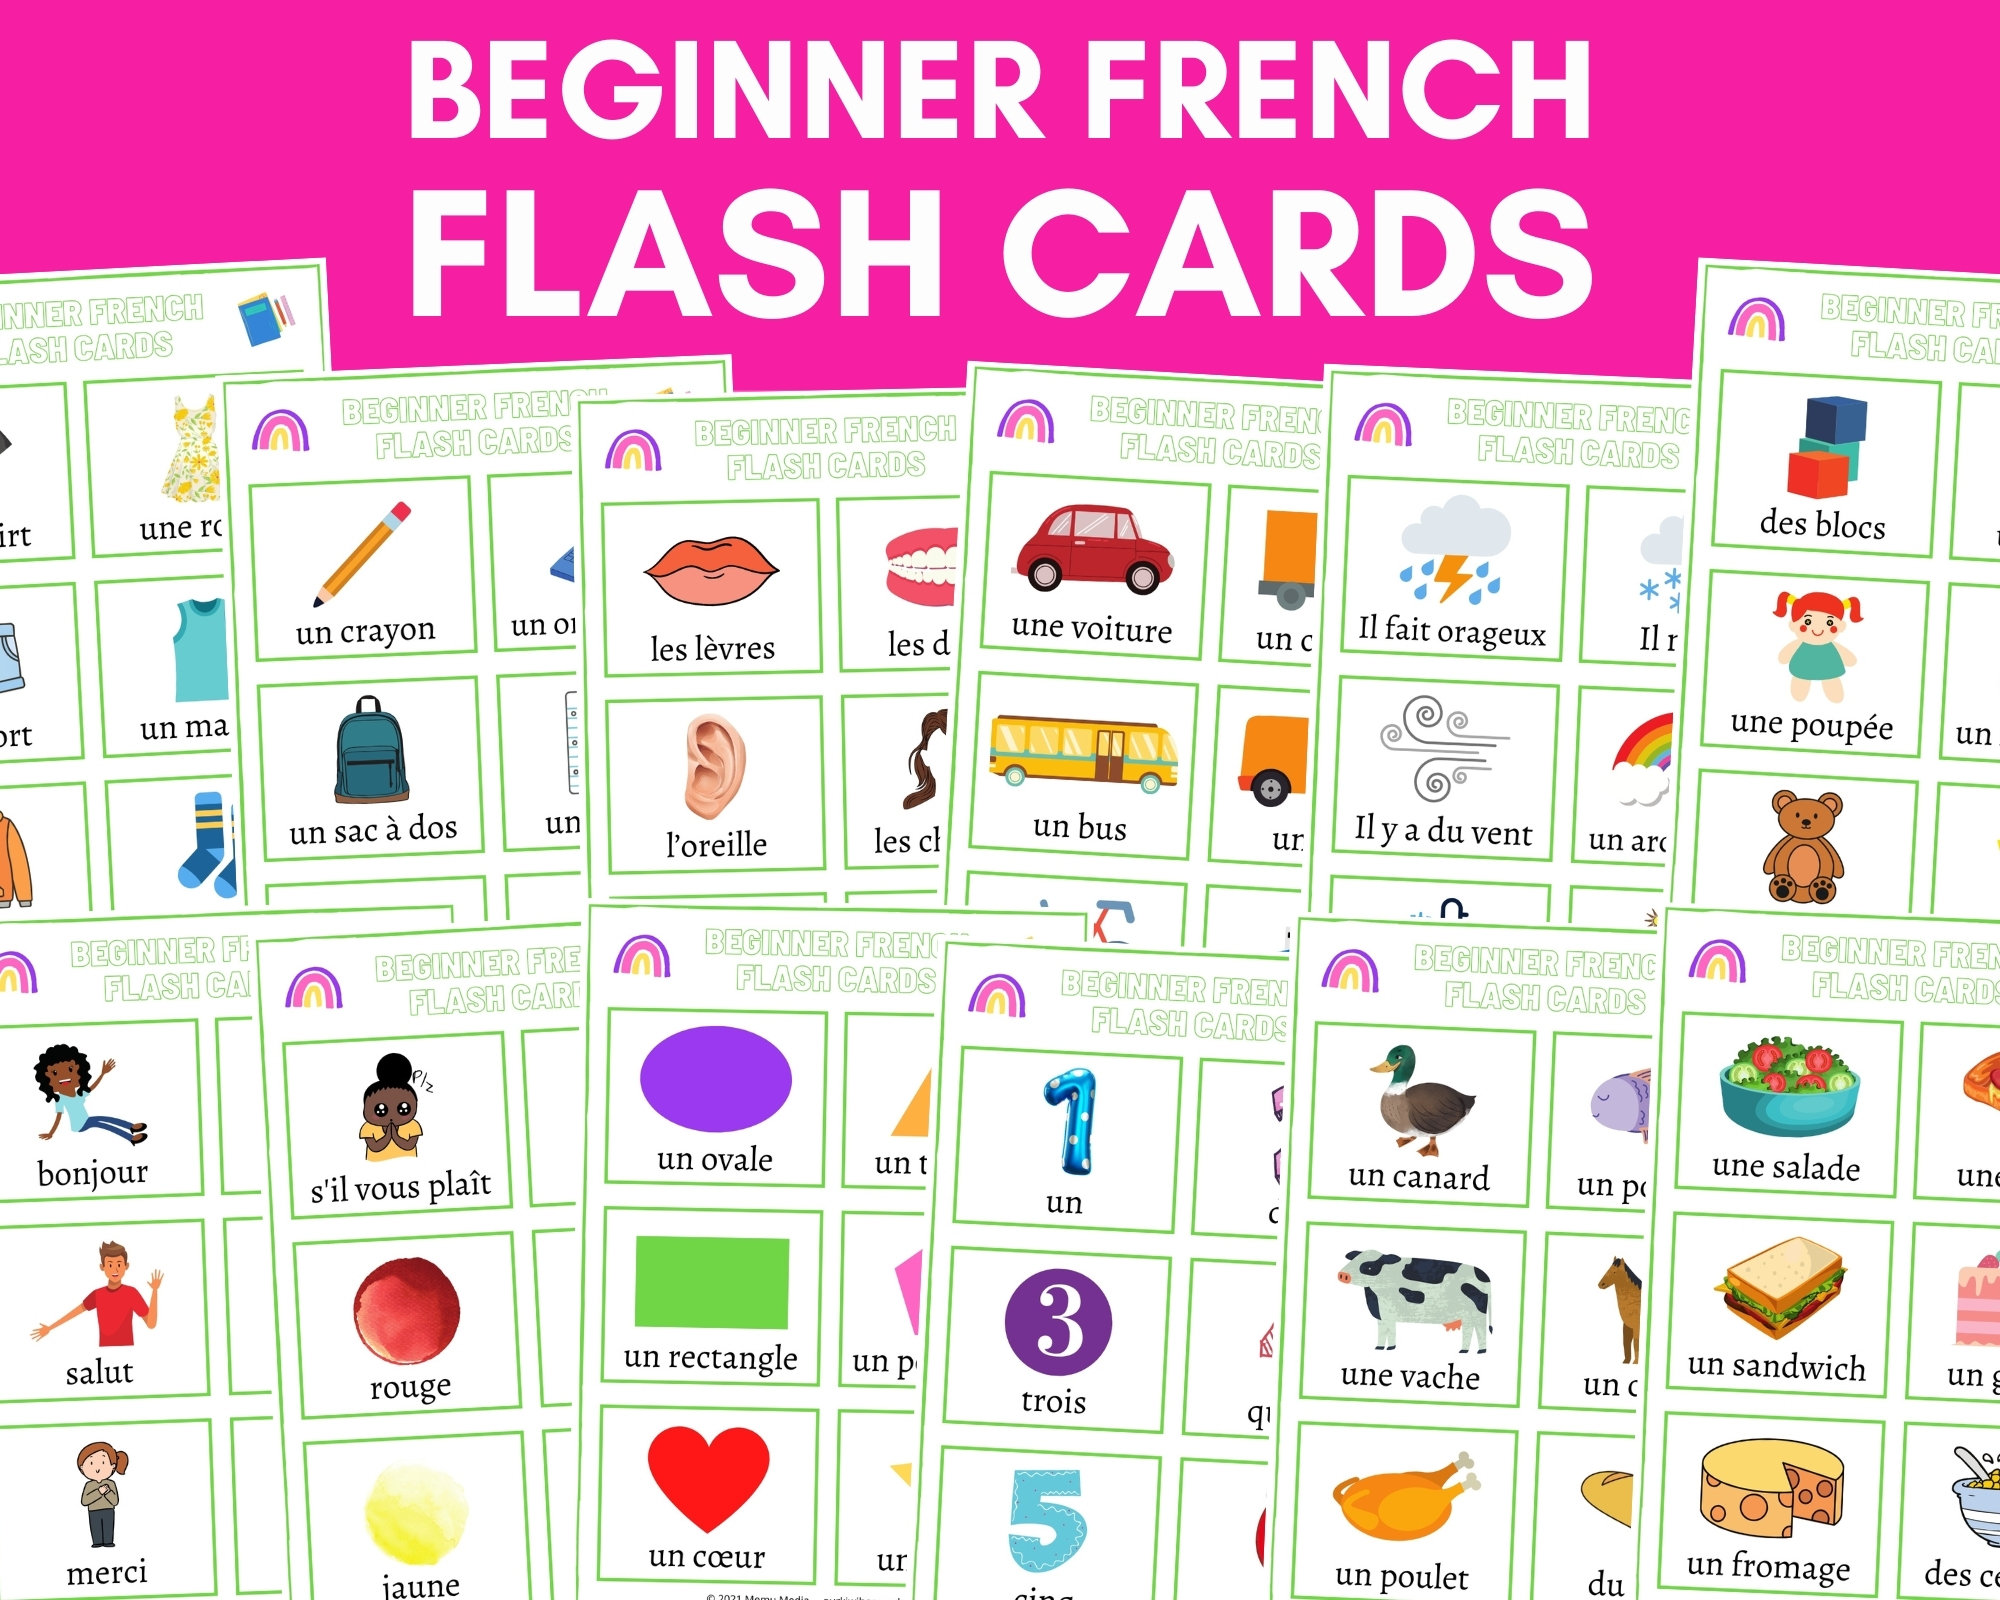 Beginner french flash cards french learning resource franãais download now